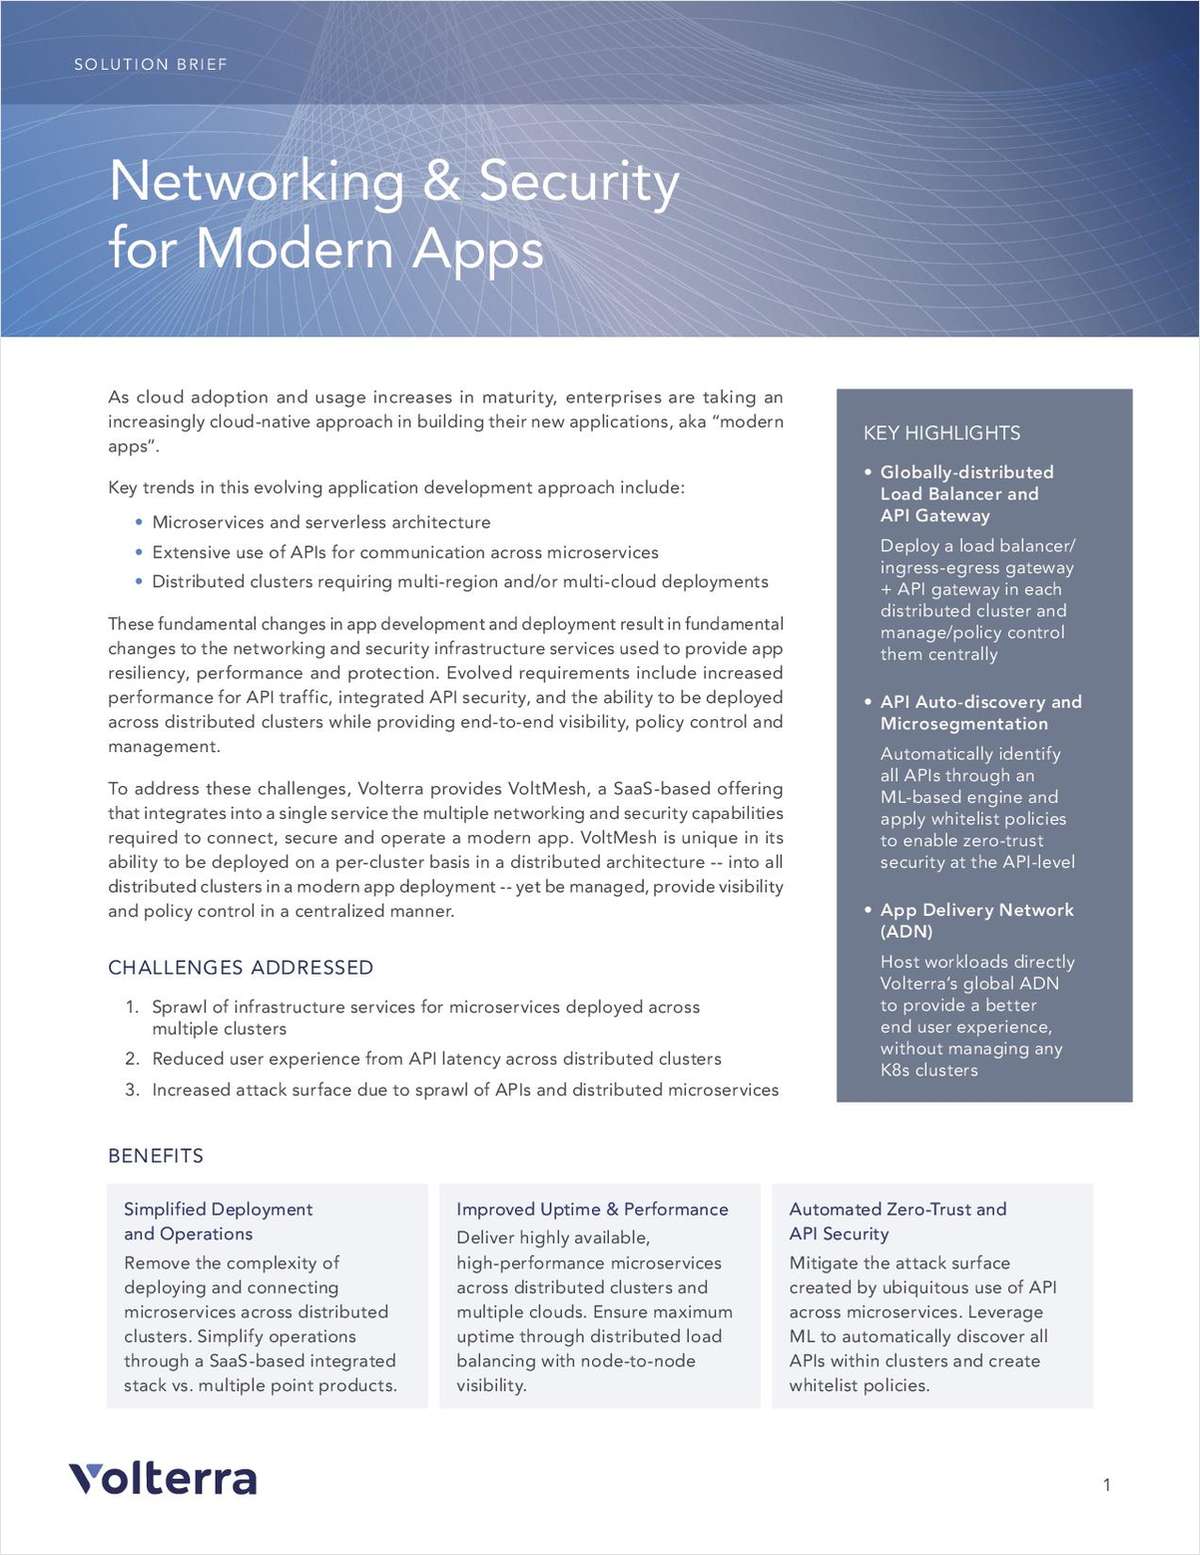 Networking & Security for Modern Apps